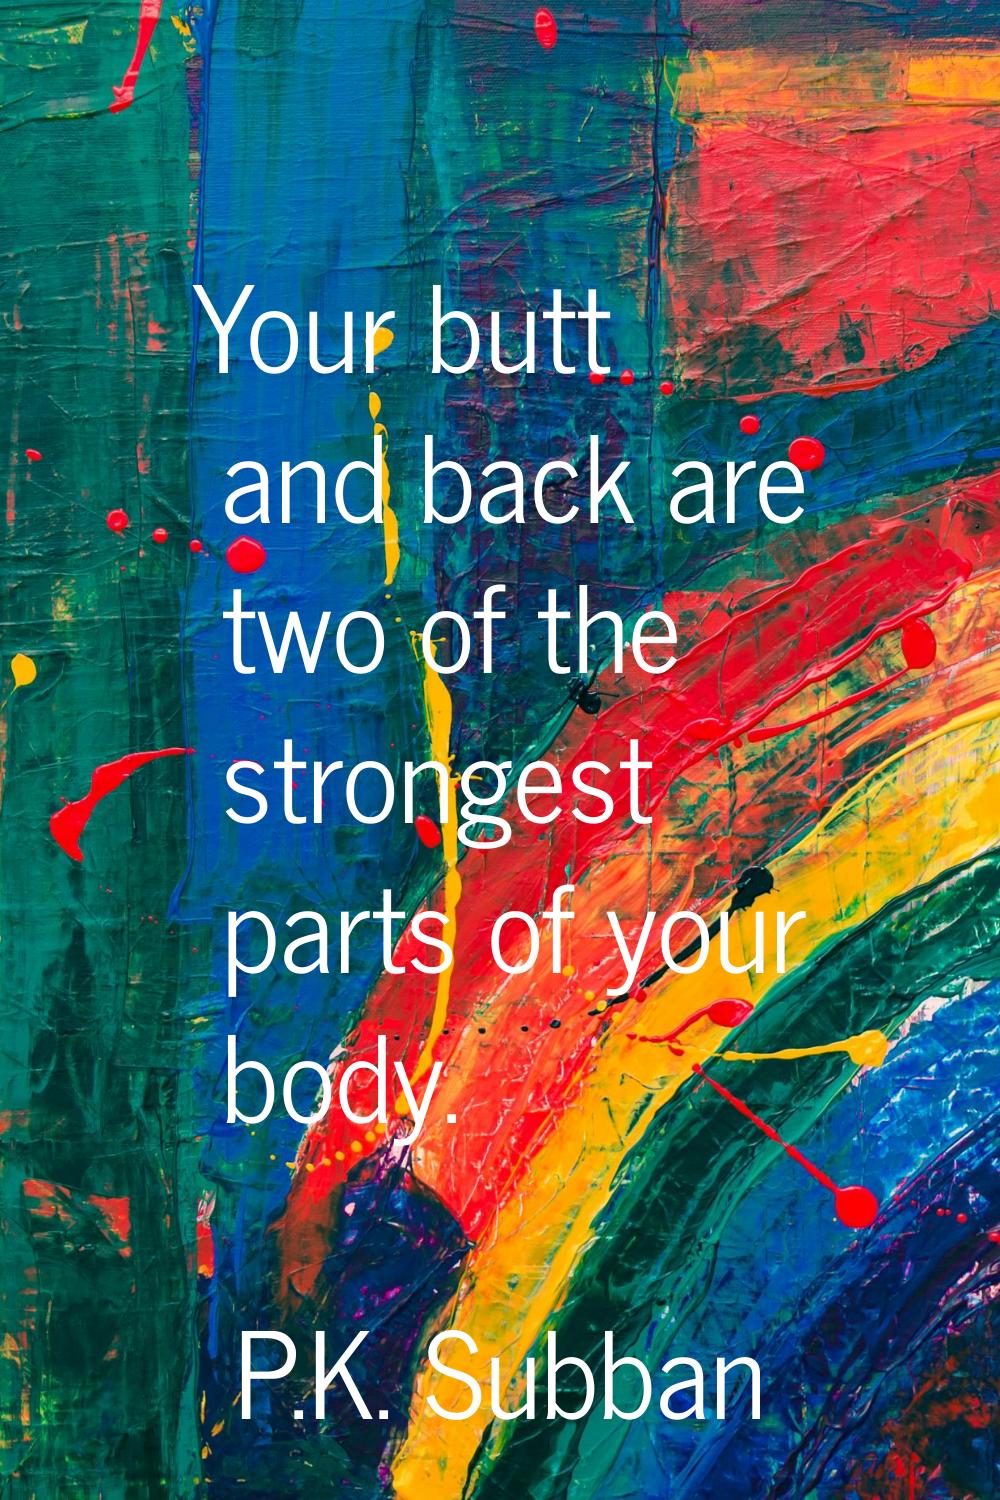 Your butt and back are two of the strongest parts of your body.